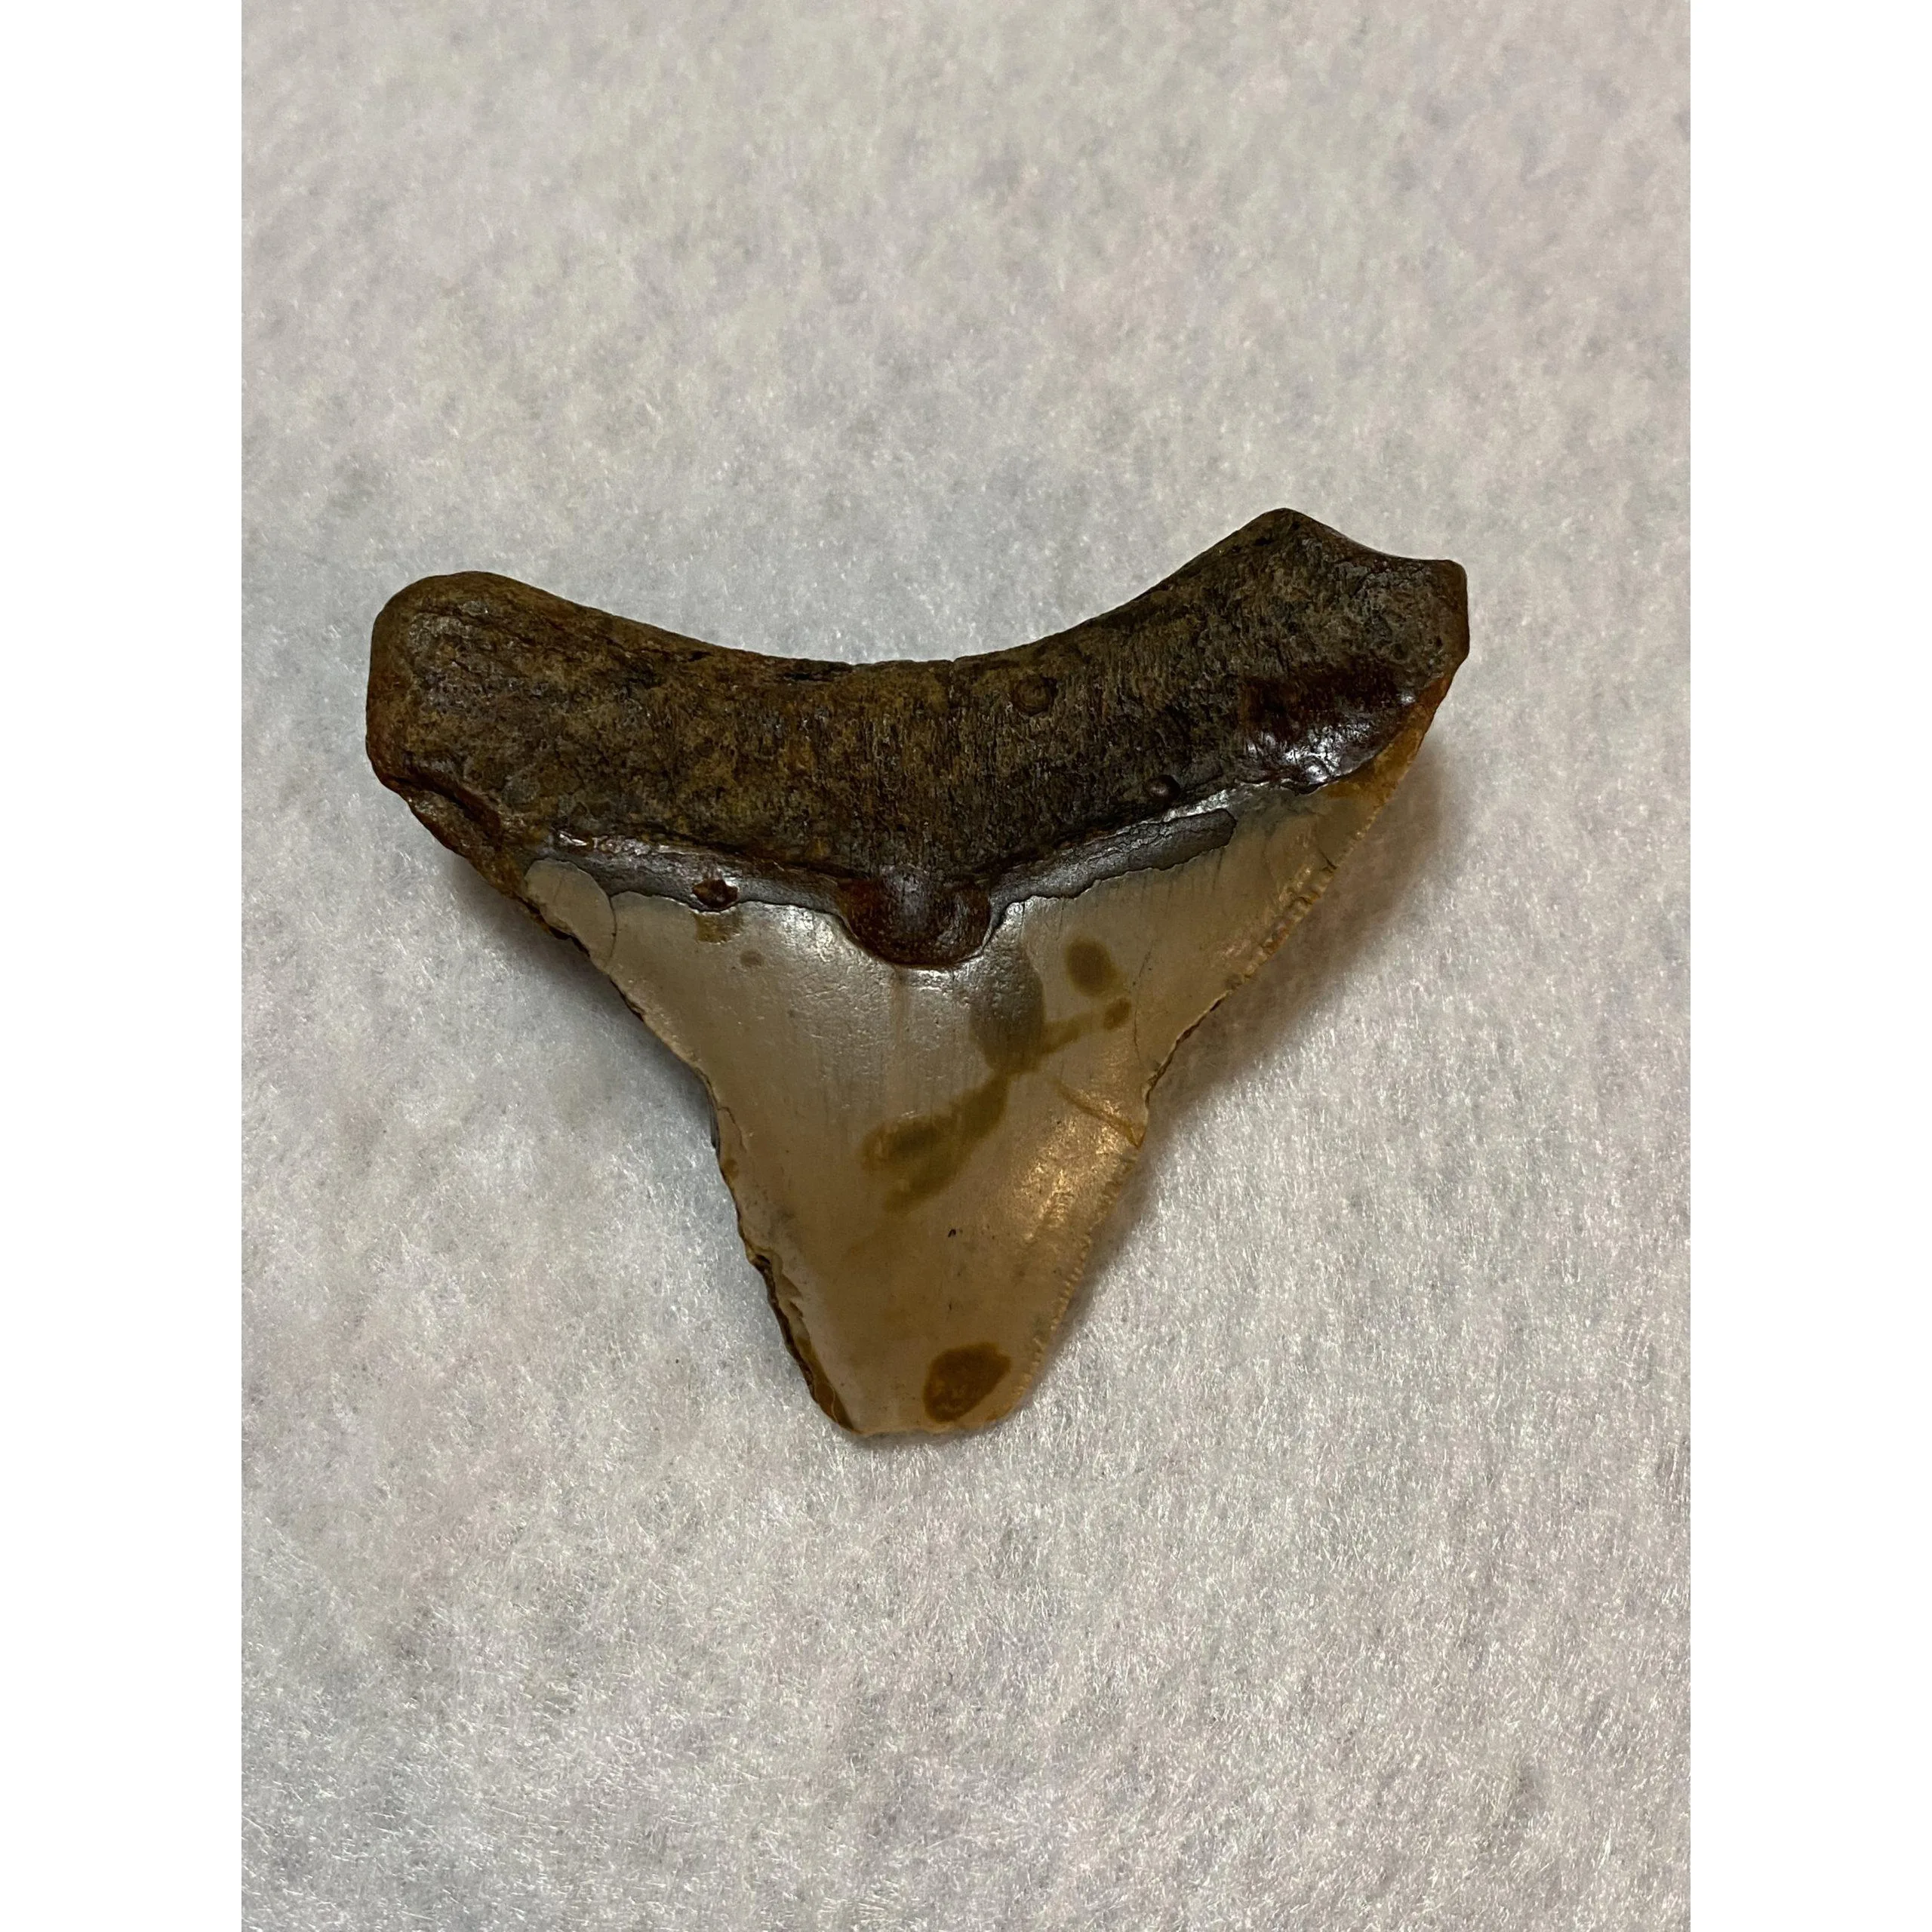 Megalodon fossil tooth, S. Carolina, 3.20 inch Prehistoric Online